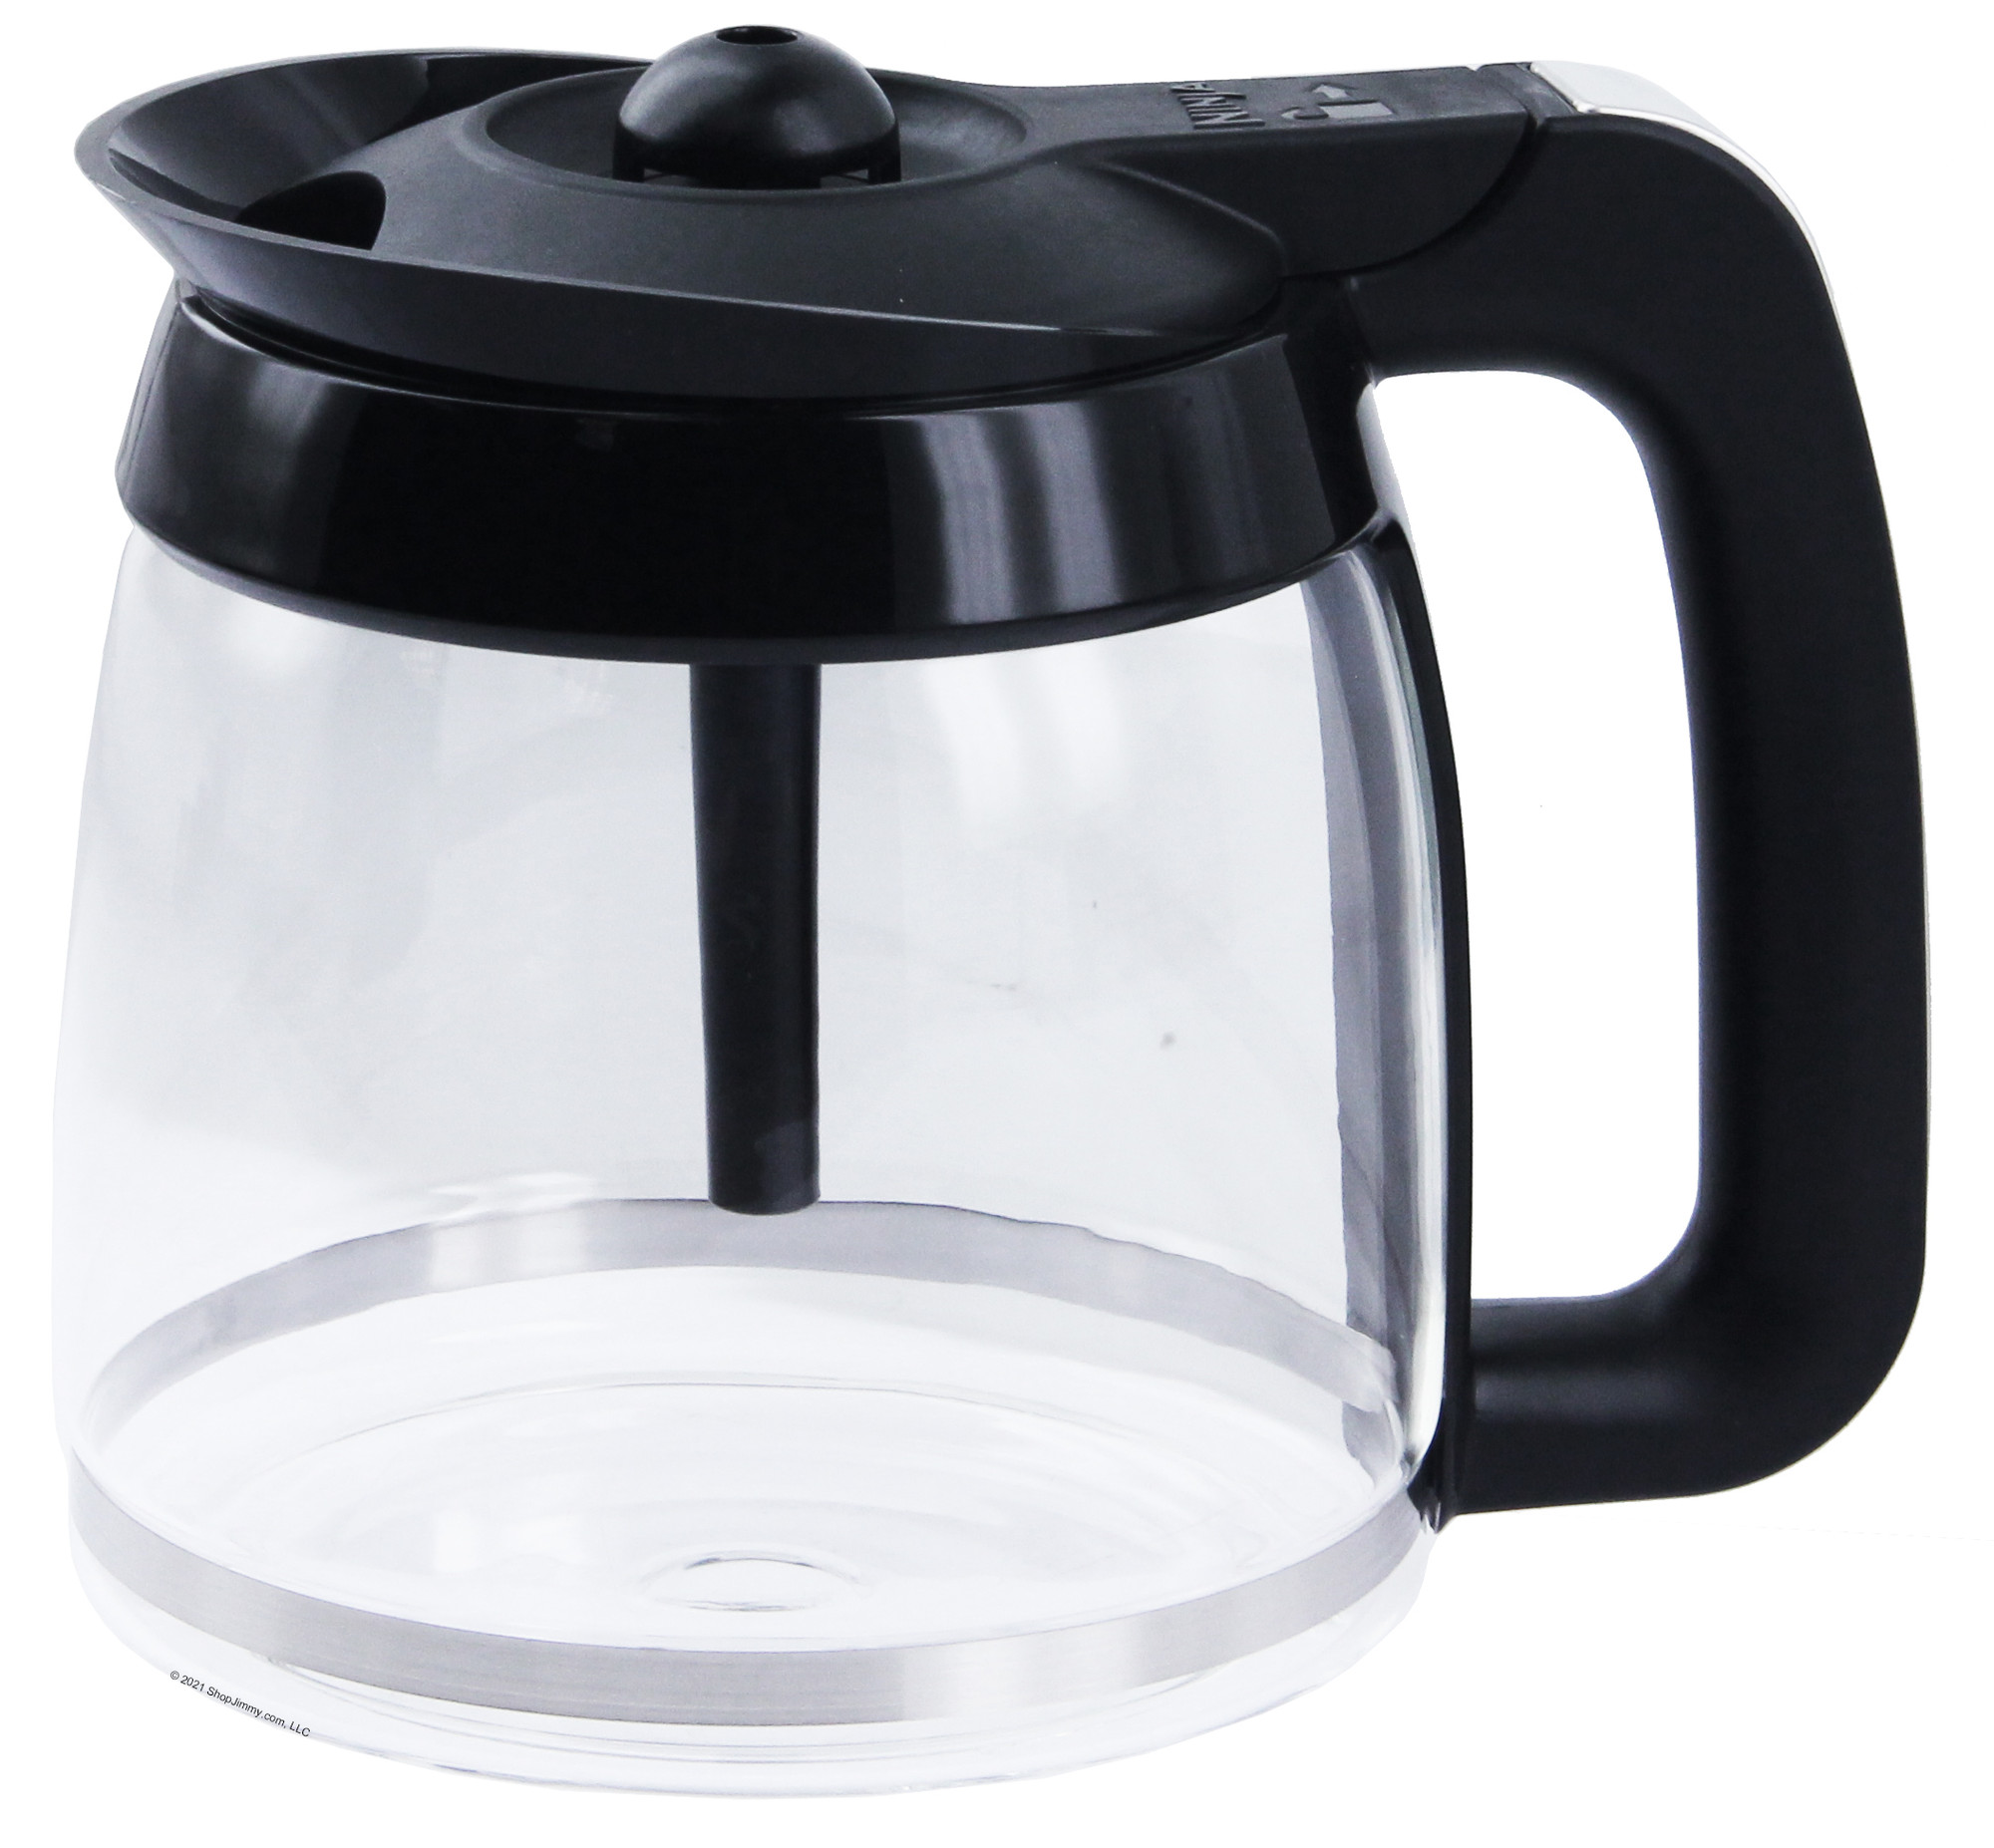 SendExtra 12-Cup Replacement Glass Carafe Pot Compatible with Ninja Coffee  Brewer Maker Models CE251 CE201 CE201C CE200 CE200C Model# XGLSLID200